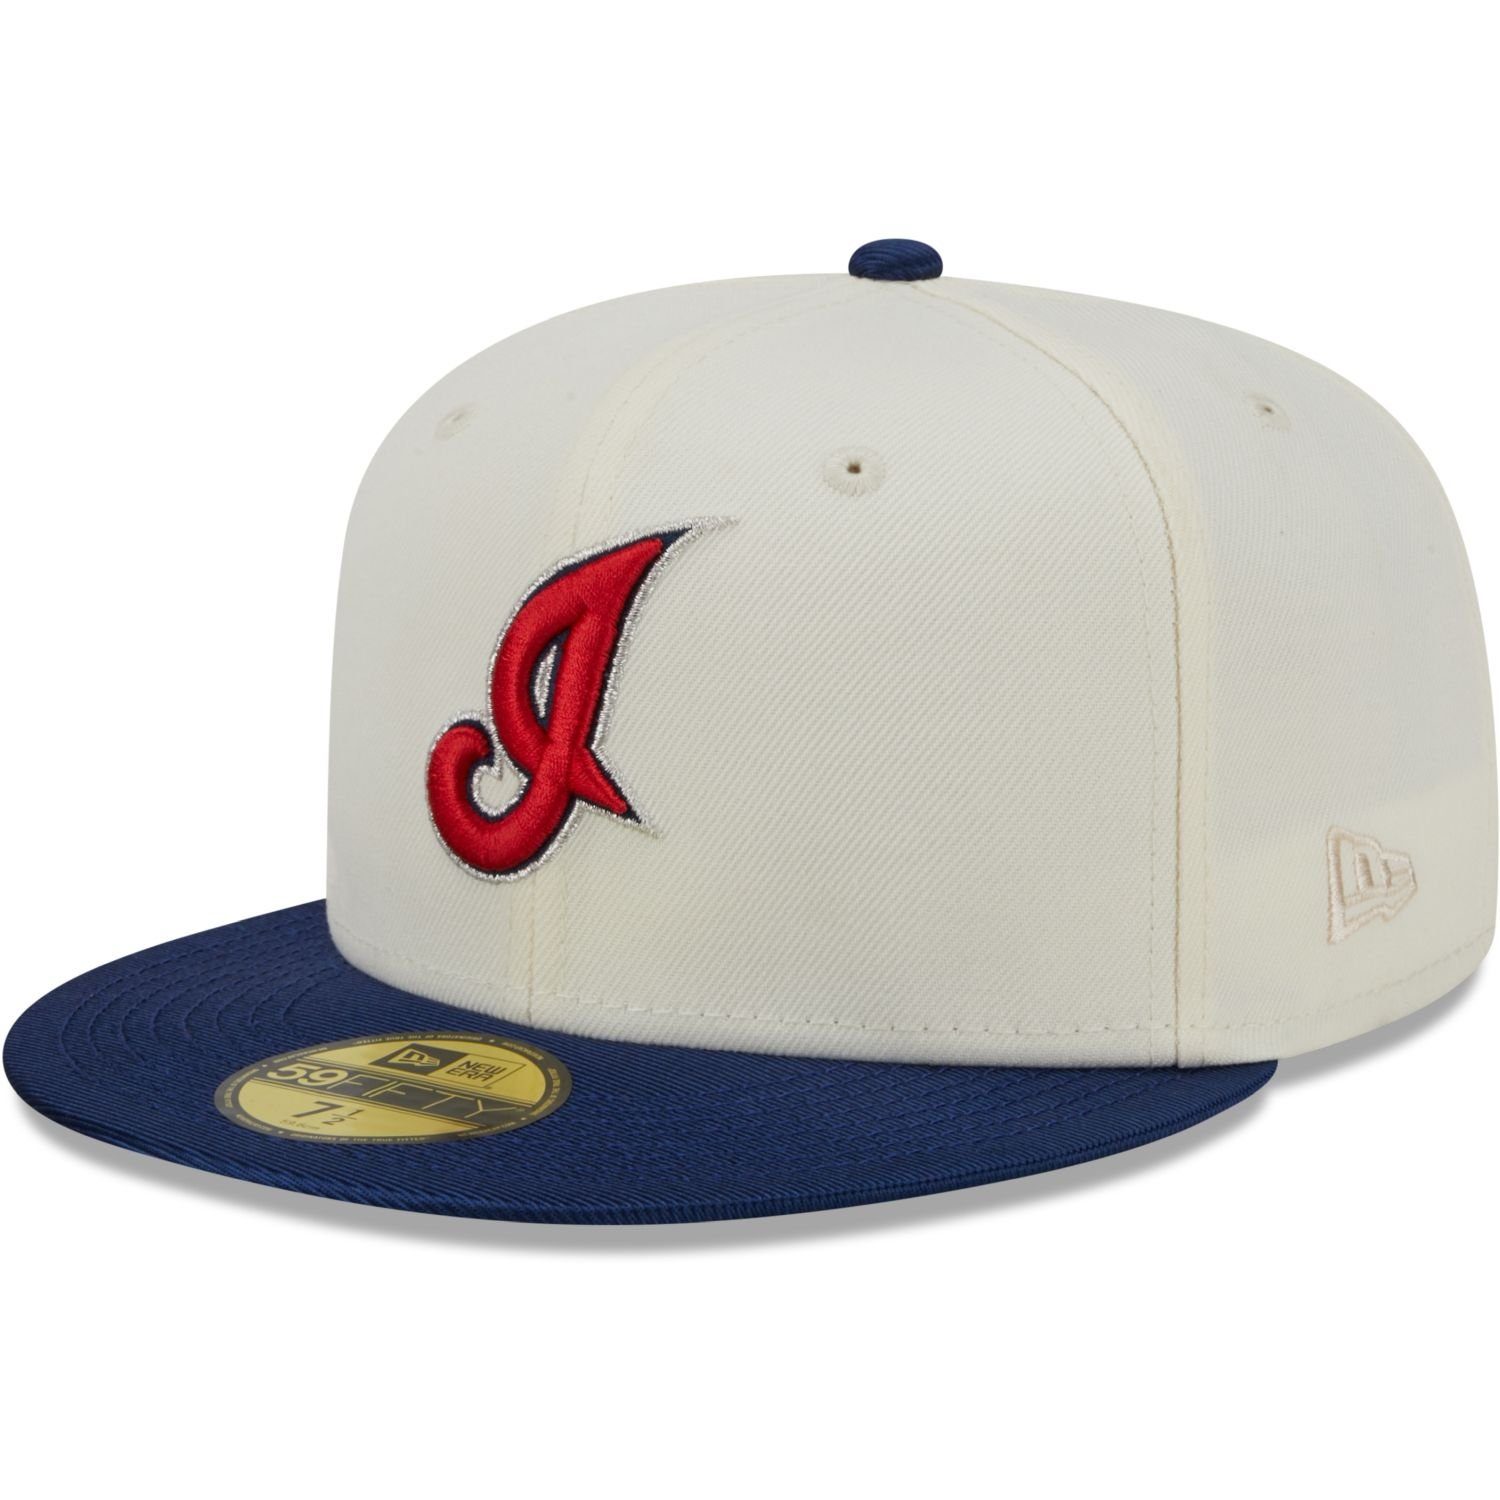 New Era Fitted Cap 59Fifty SHIMMER Cleveland Indians